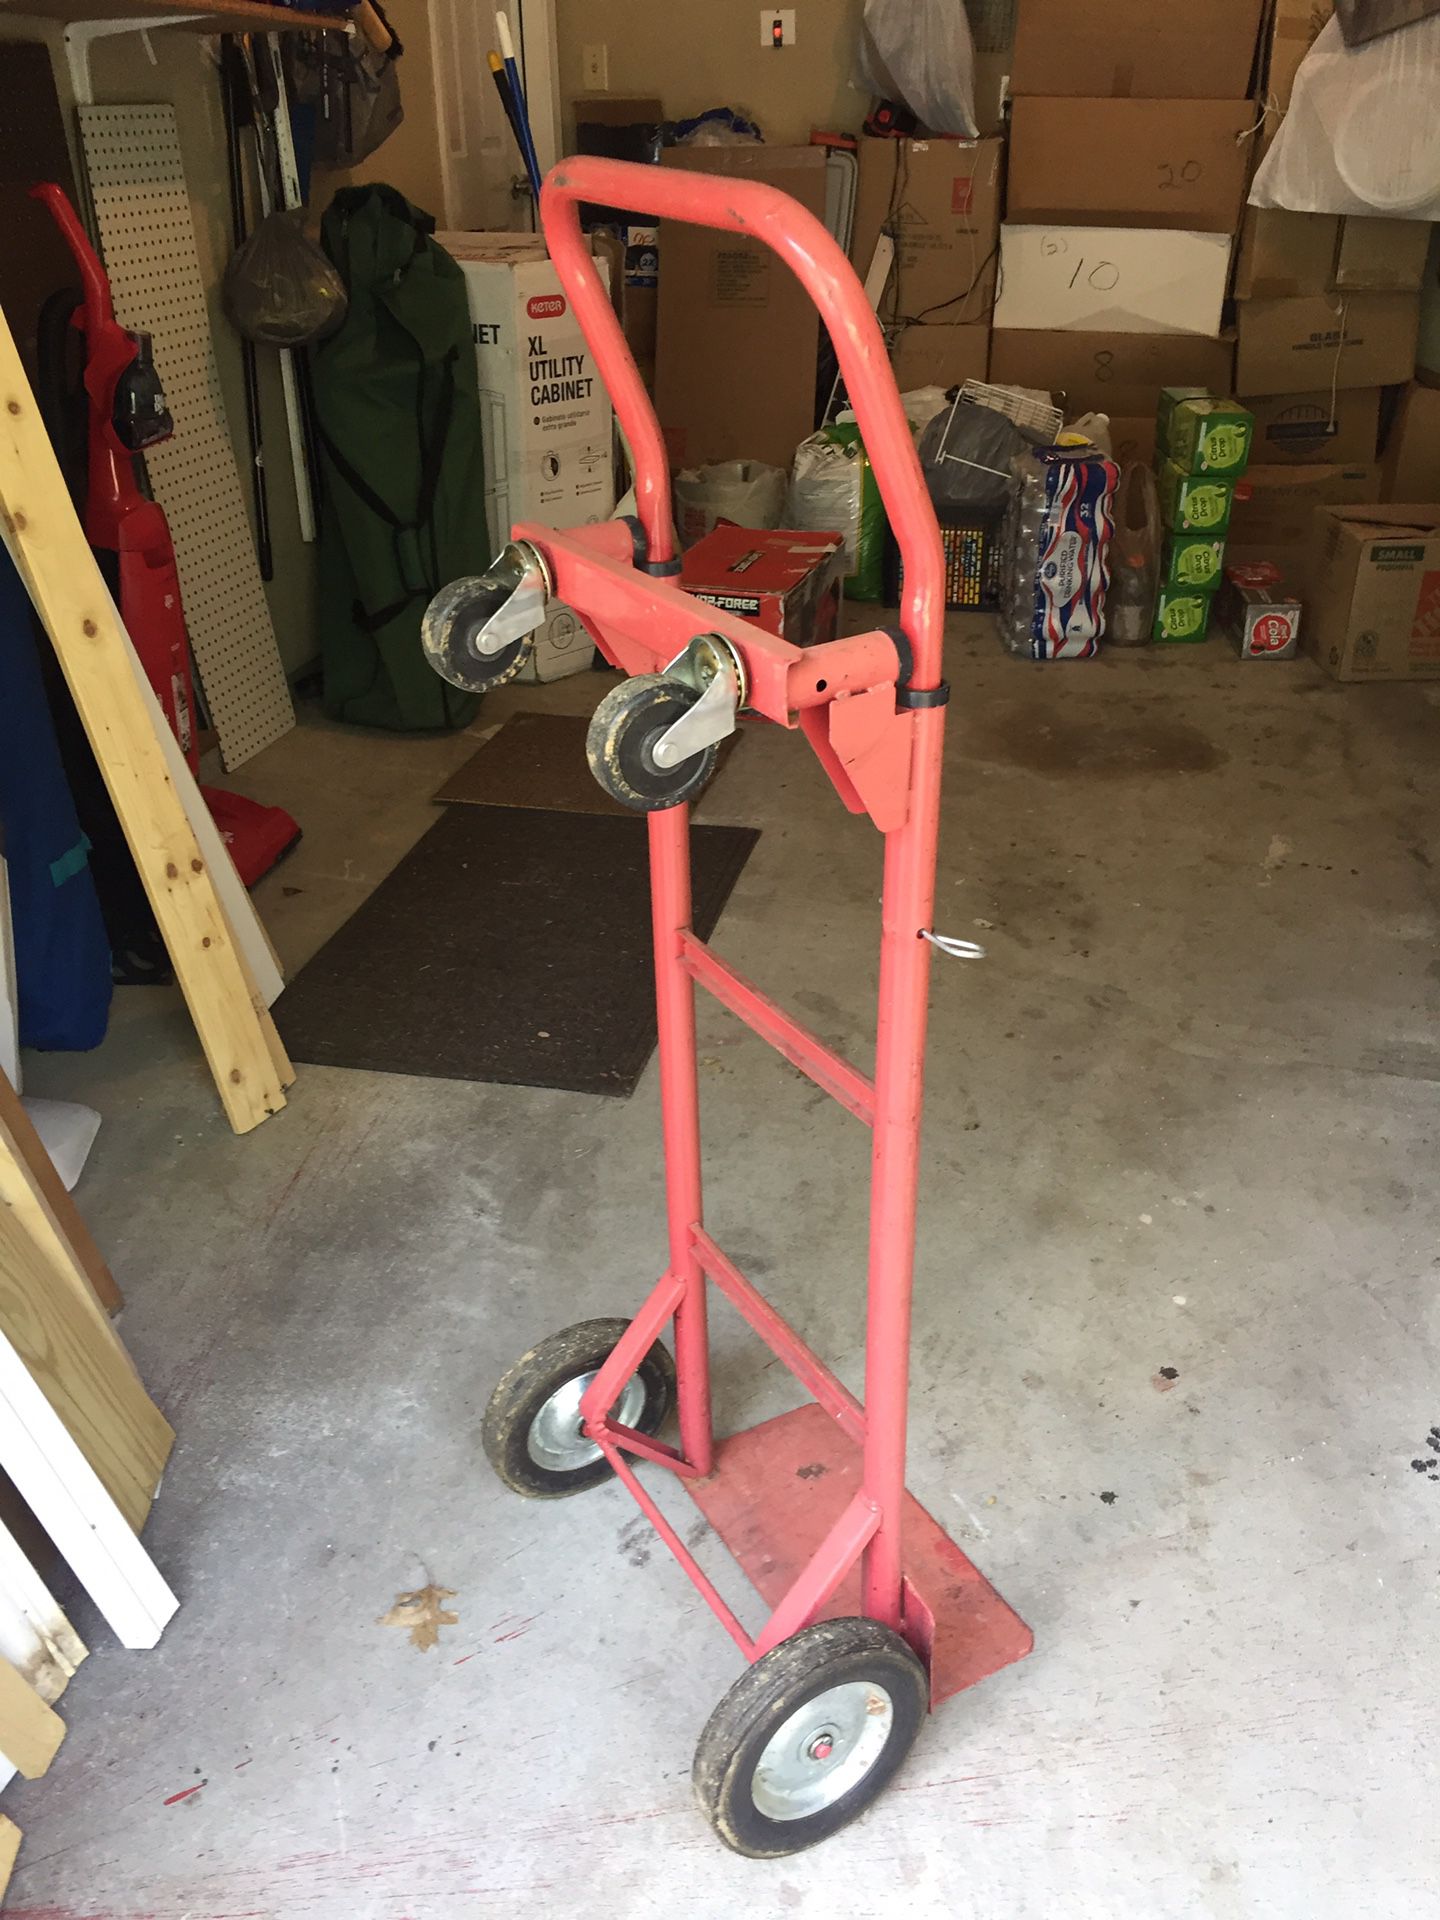 2 Way Hand Dolly Good Condition $20 obo (pick up only)